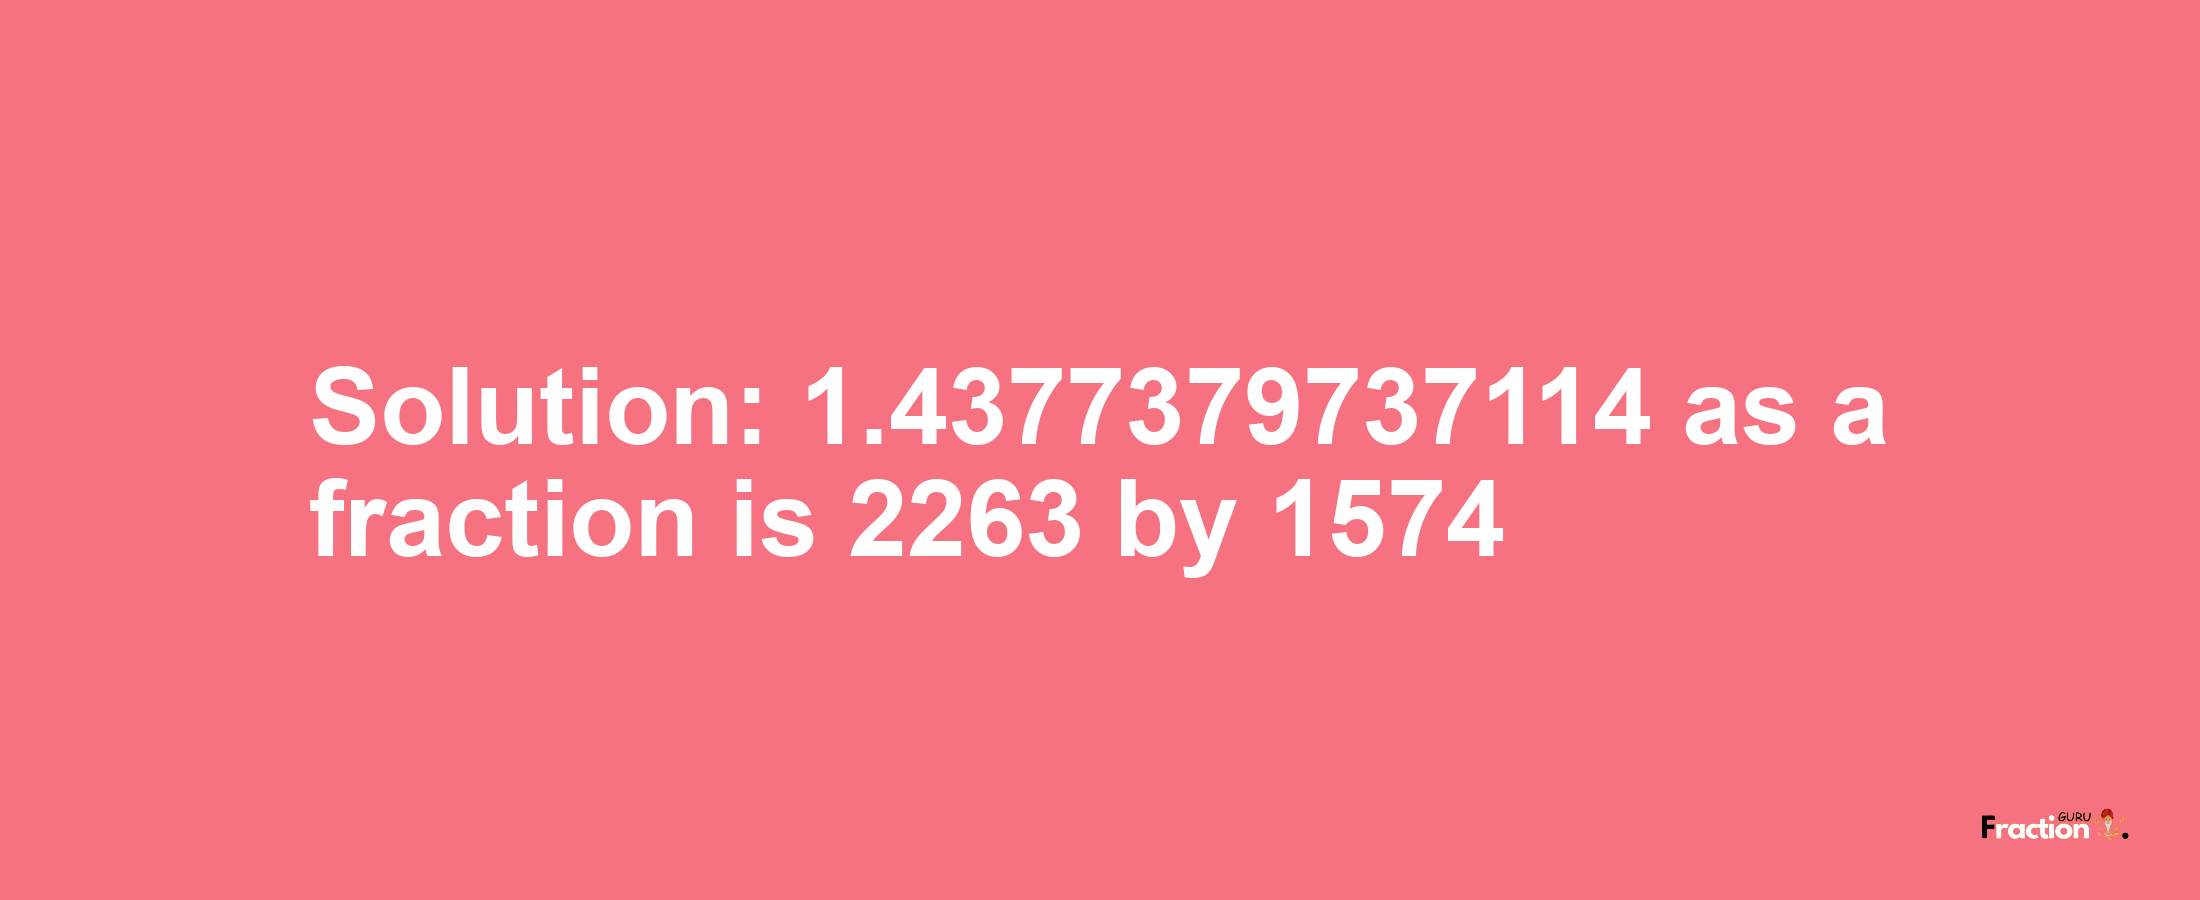 Solution:1.4377379737114 as a fraction is 2263/1574